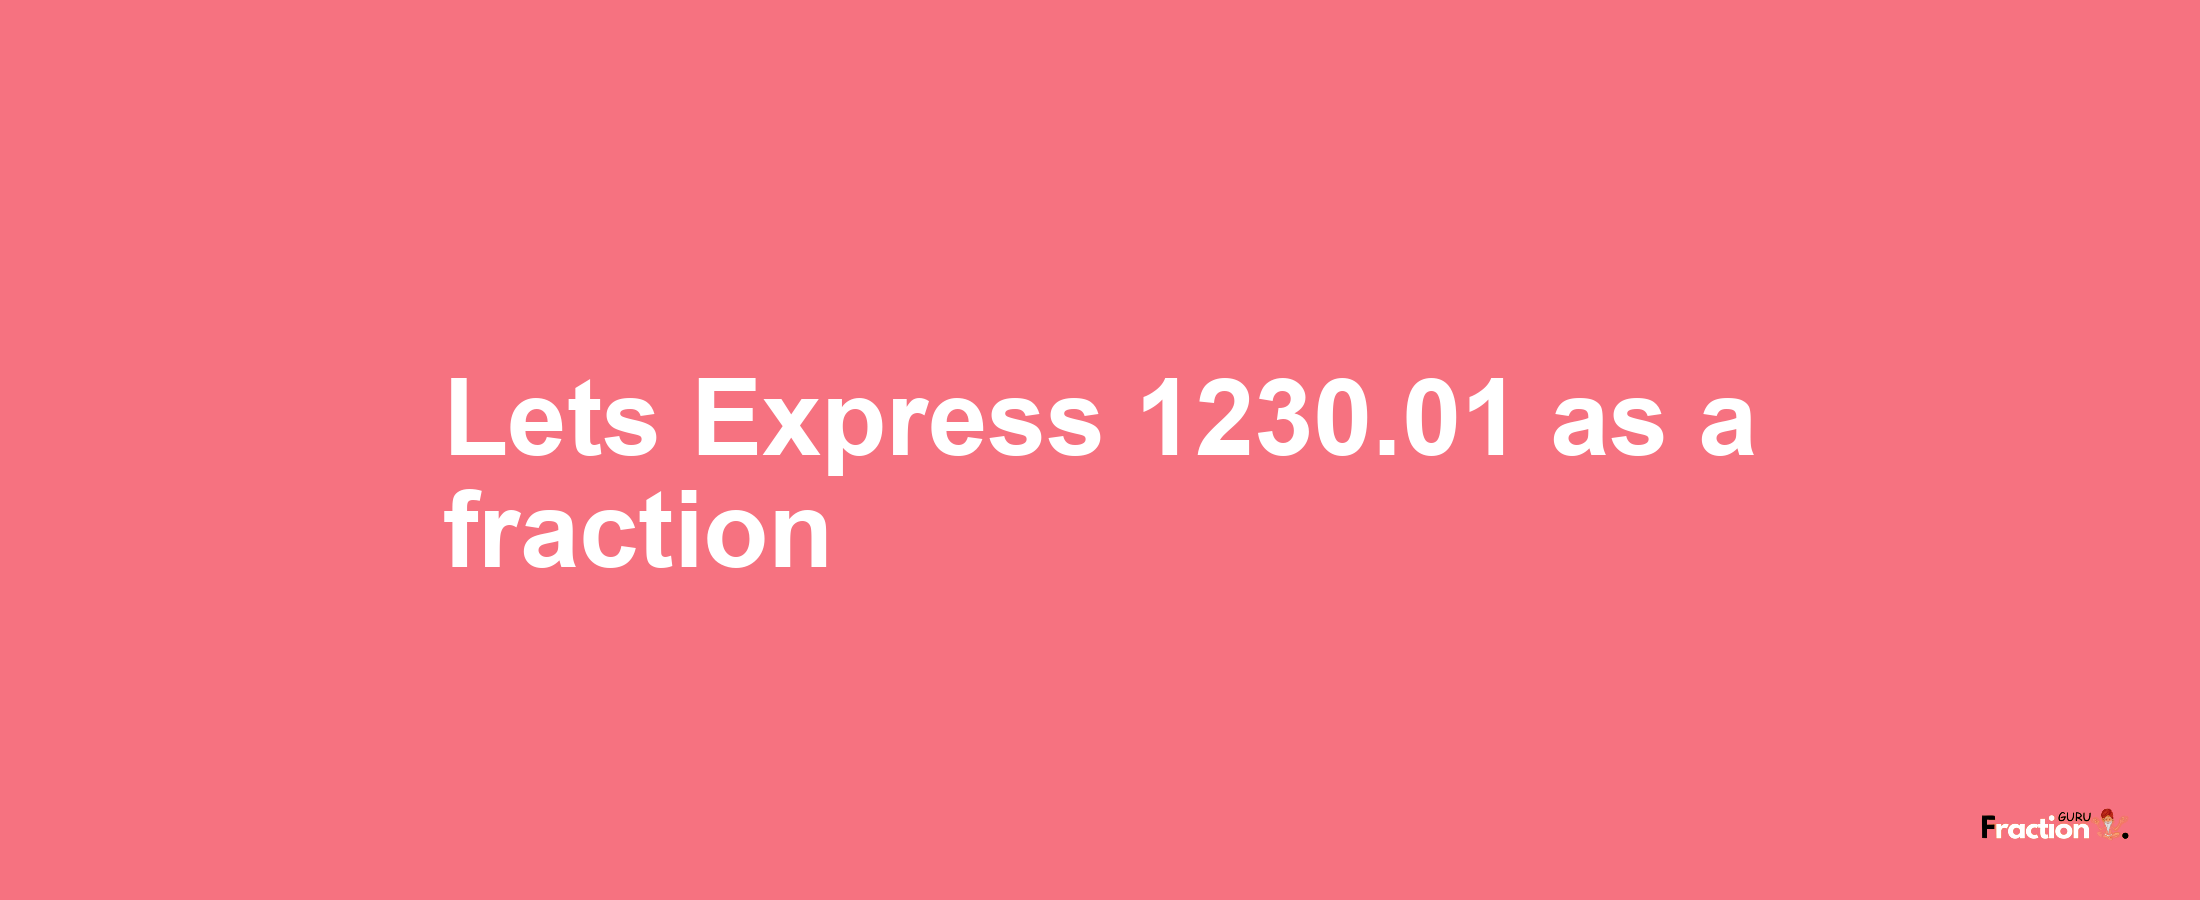 Lets Express 1230.01 as afraction